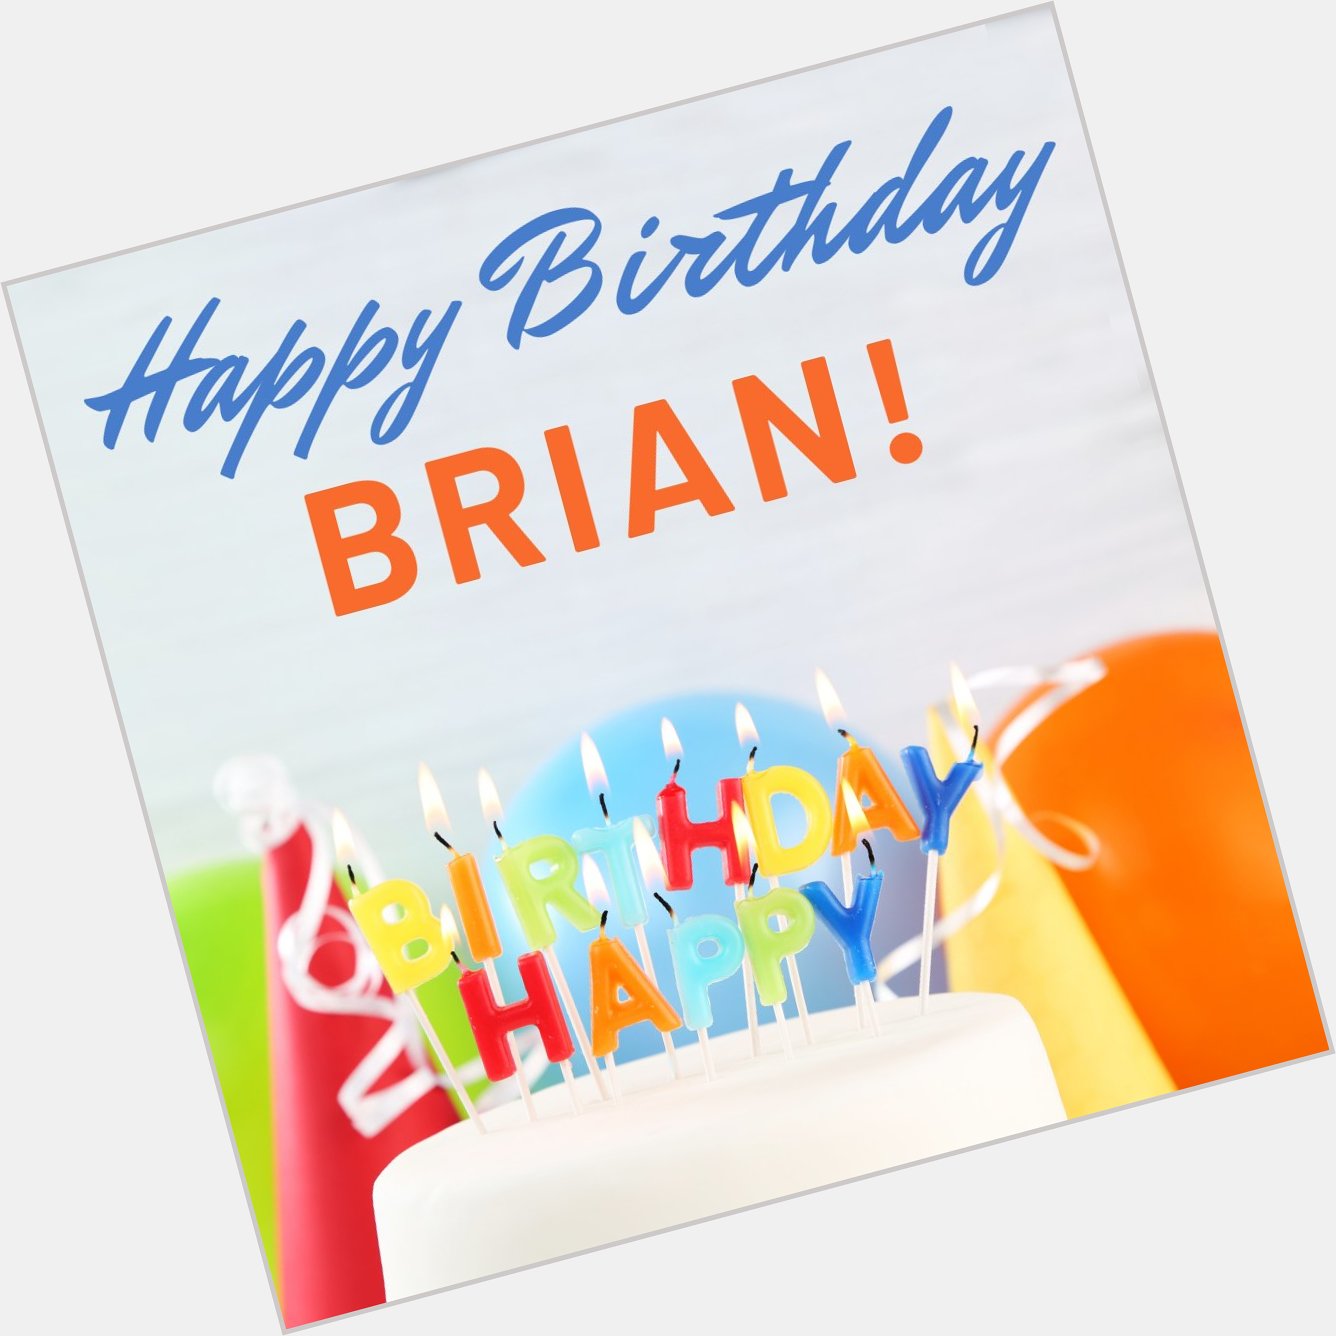 Brian Capron is a service technician in our Chattanooga location and today is his birthday! Happy Birthday, Brian! 